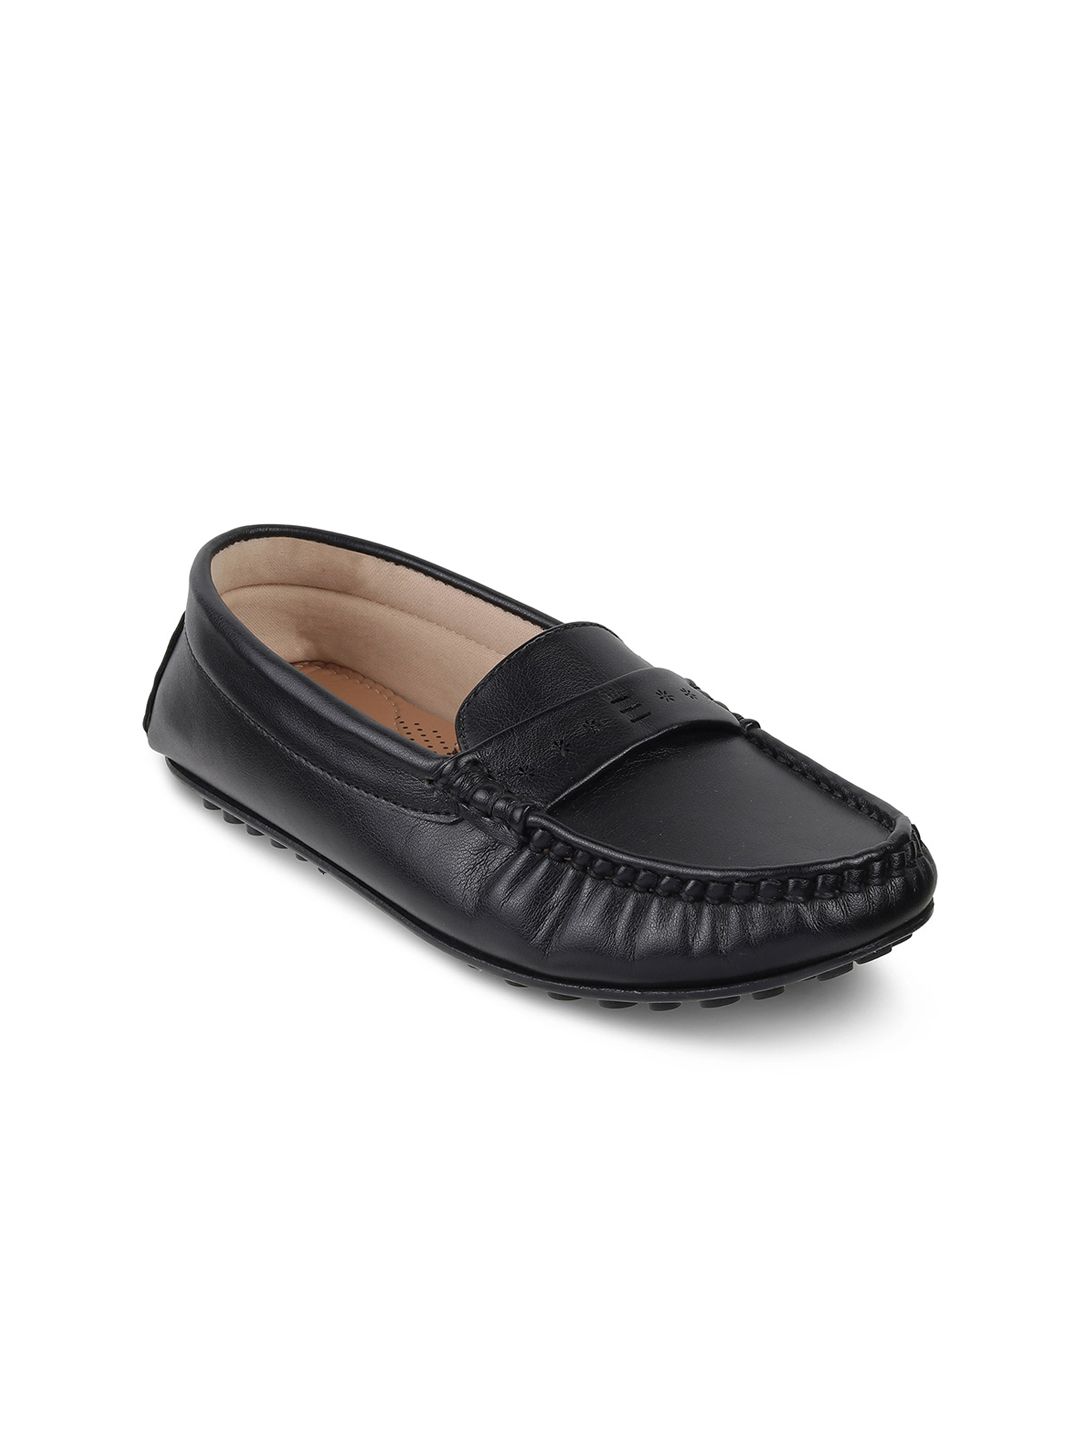 PEPPER Women Slip-On Loafers Price in India